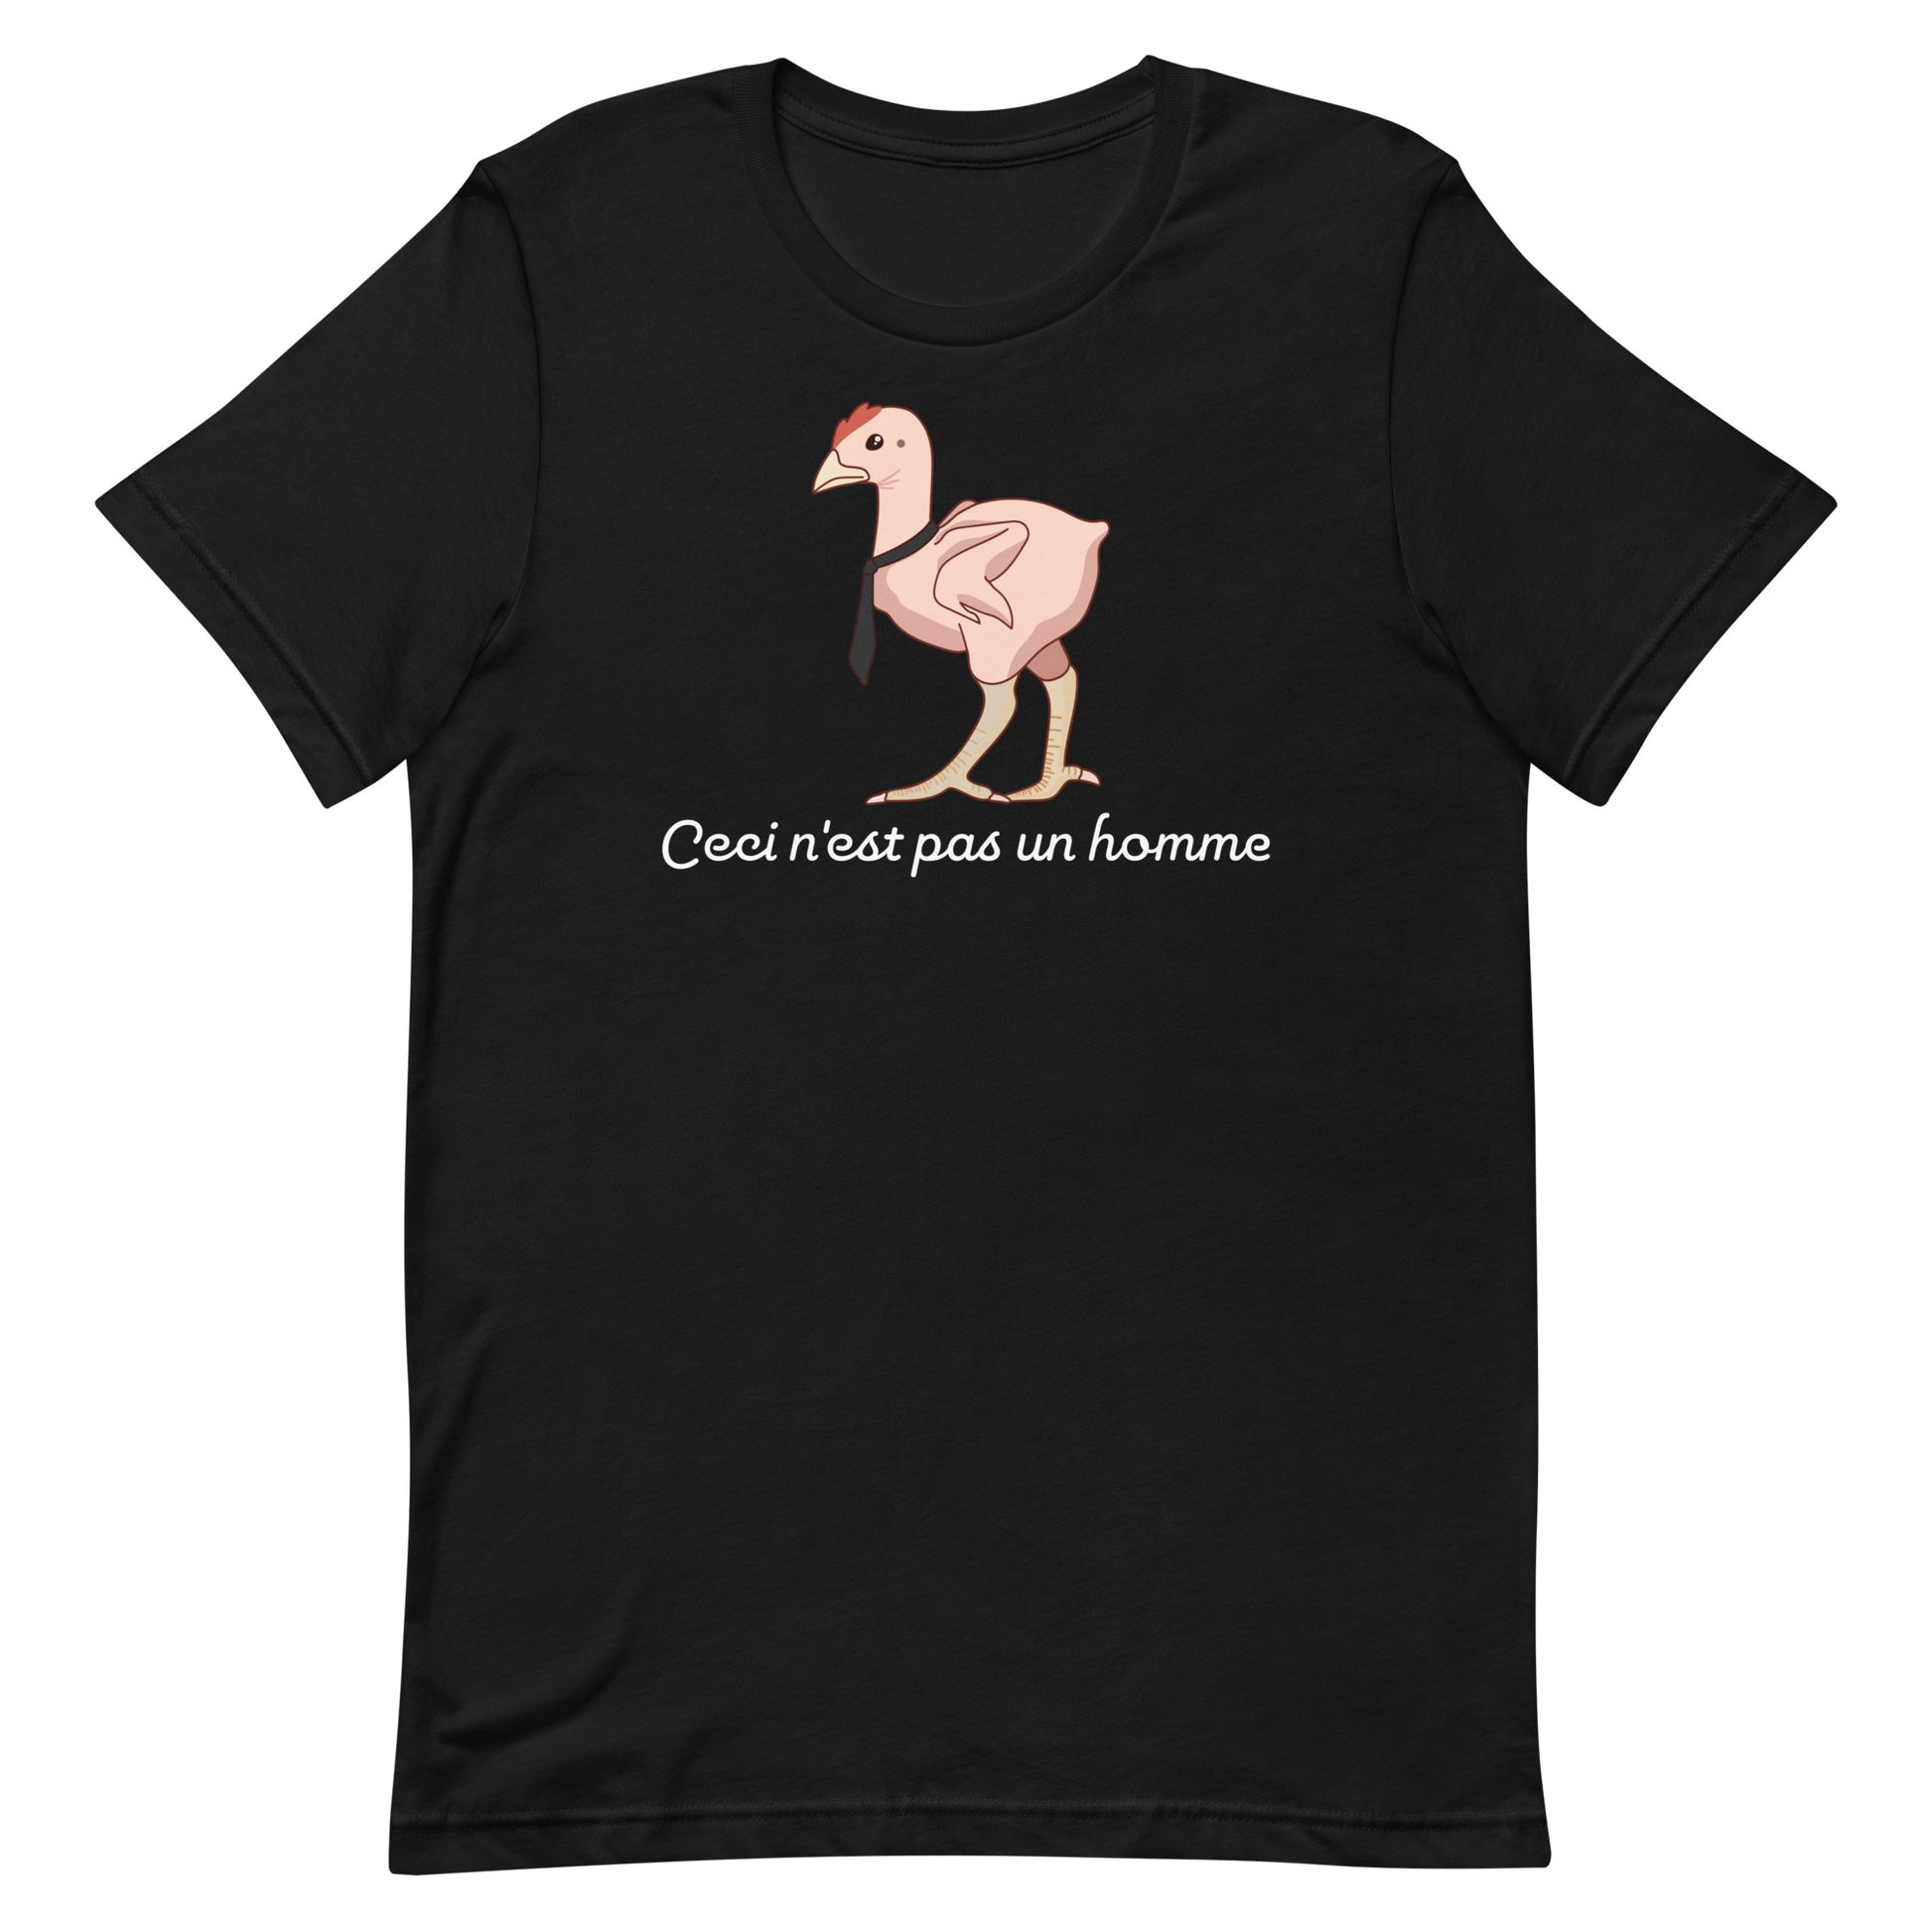 A black crewneck t-shirt featuring an illustration of a featherless chicken wearing a tie. Text underneath the chicken reads "Ceci n'est pas un homme" in a cursive font.